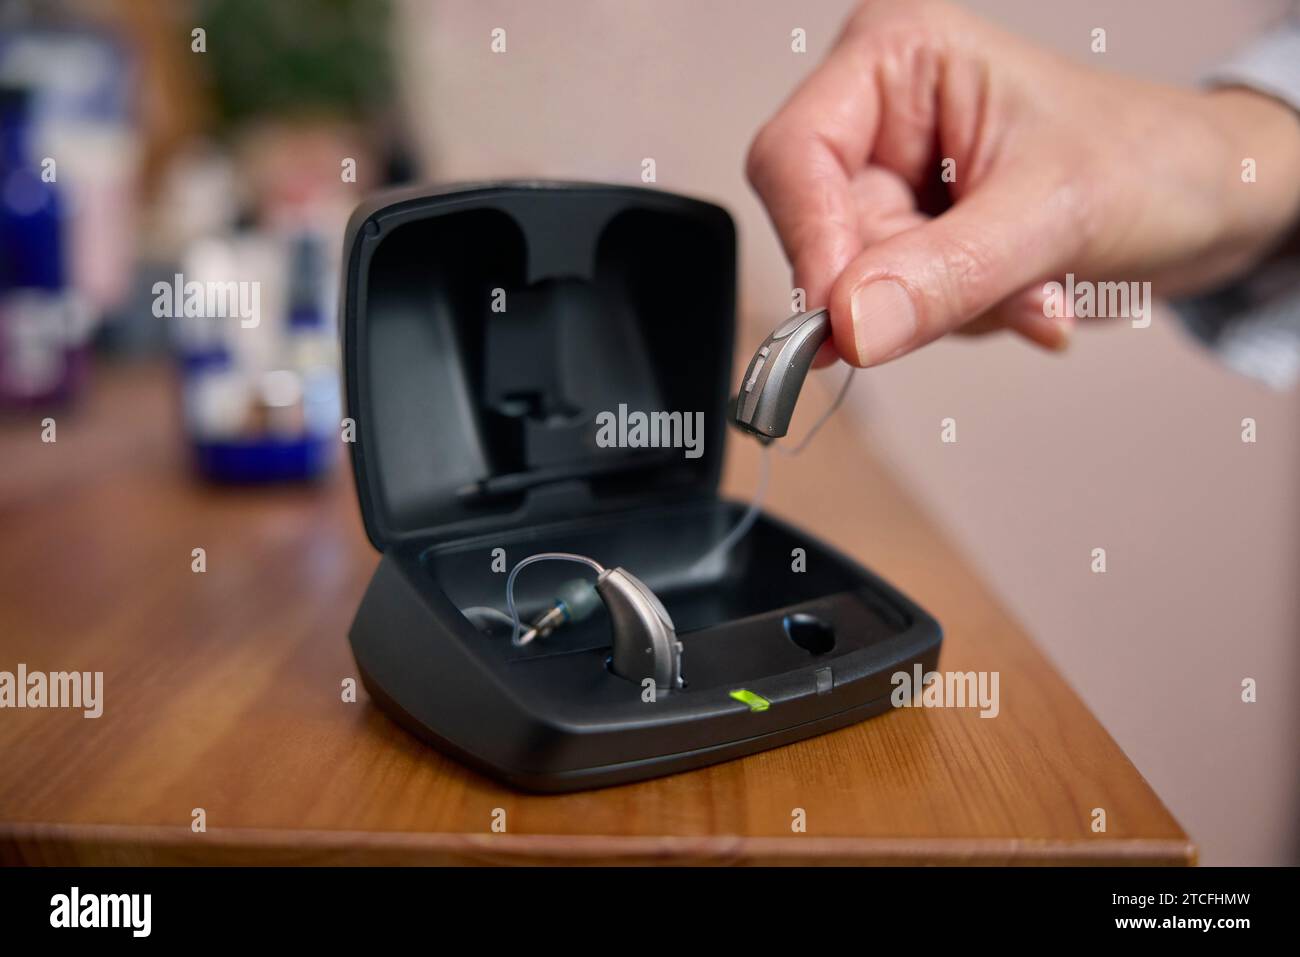 Close Up Of Person Picking Up Wireless Hearing Aid Or Device From Charging Case At Home Stock Photo